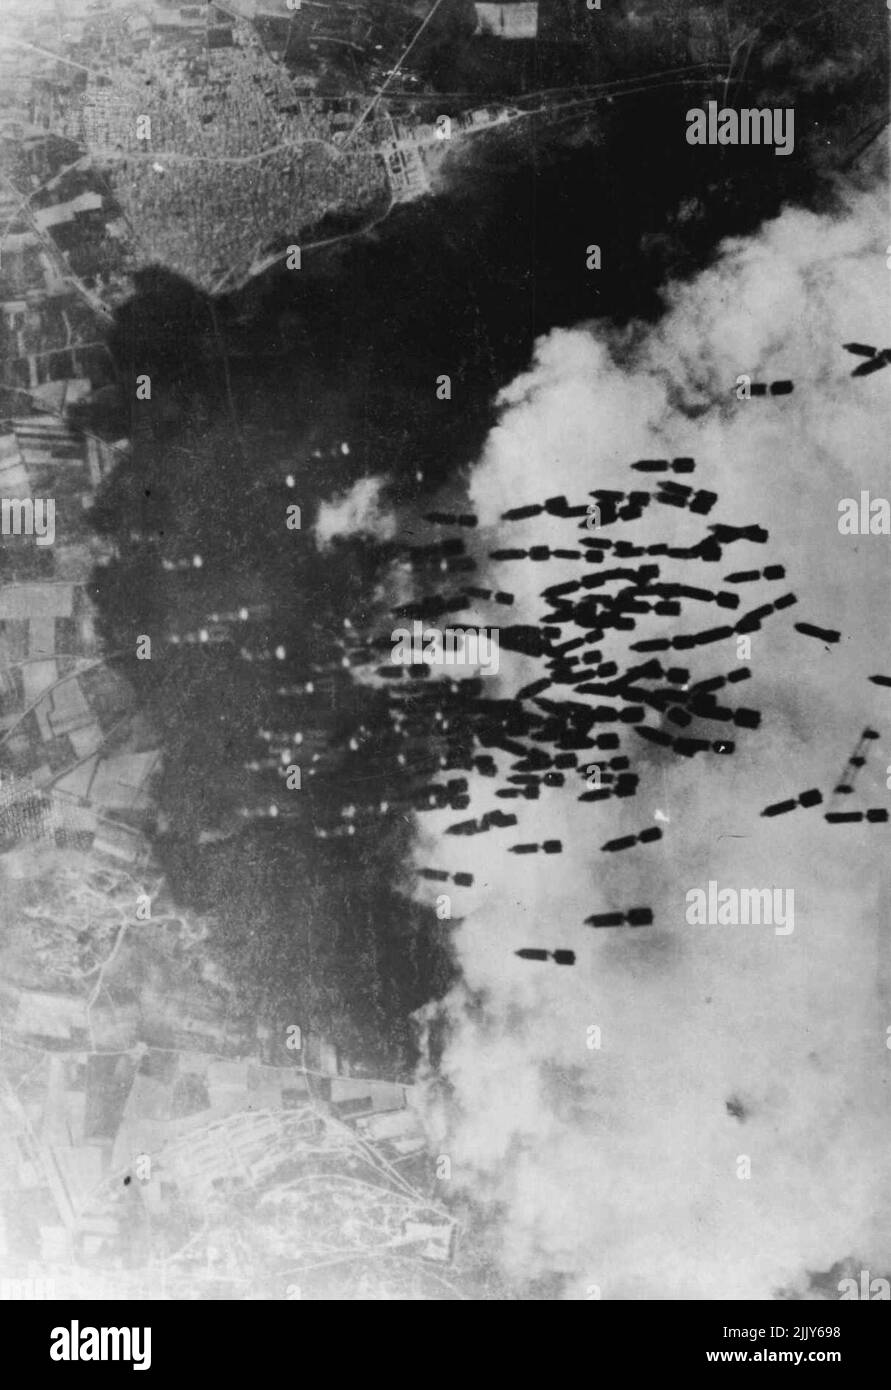 Bombs rain on Monserrato airfield, Sardinia, dropping; past the edge of a Fleecy cloud which screened U.S. Army Air Forces flying Fortresses, more than 100 bombs literally rain down on Monserrato air field near Cagliari in Sardinia. June 28, 1943. (Photo by Associated Press Photo). Stock Photo